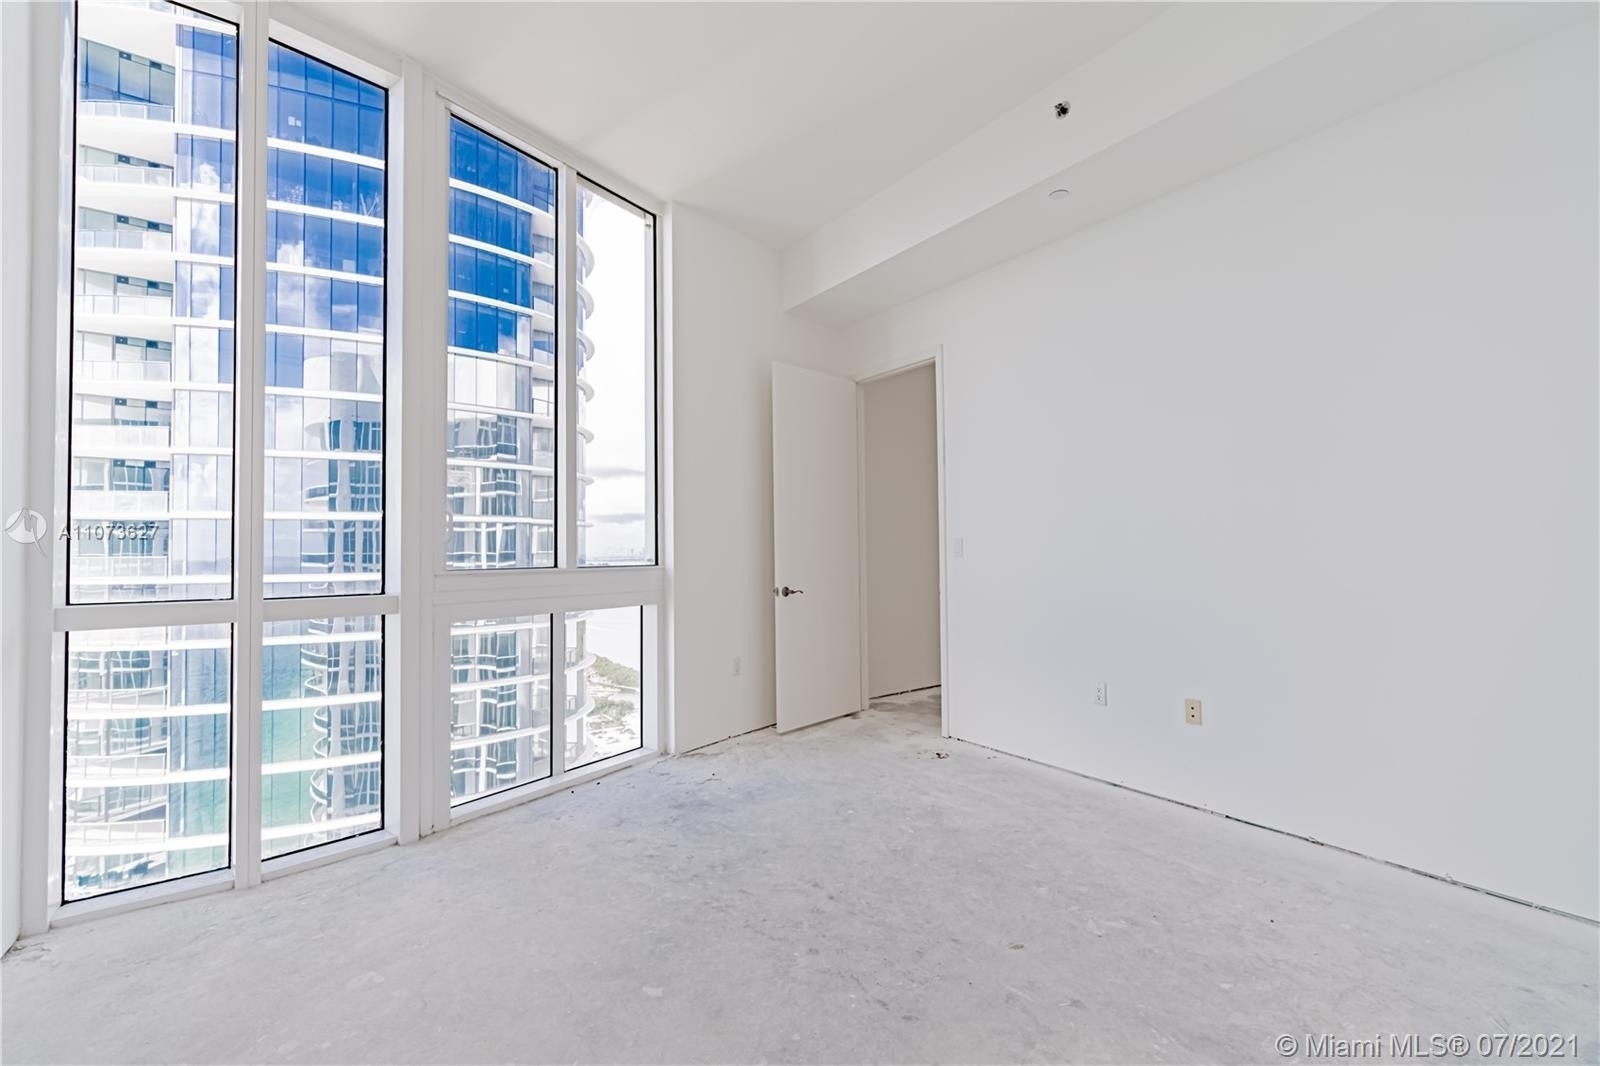 15. Condominiums for Sale at 15811 Collins Ave , 4001 Sunny Isles Beach, FL 33160